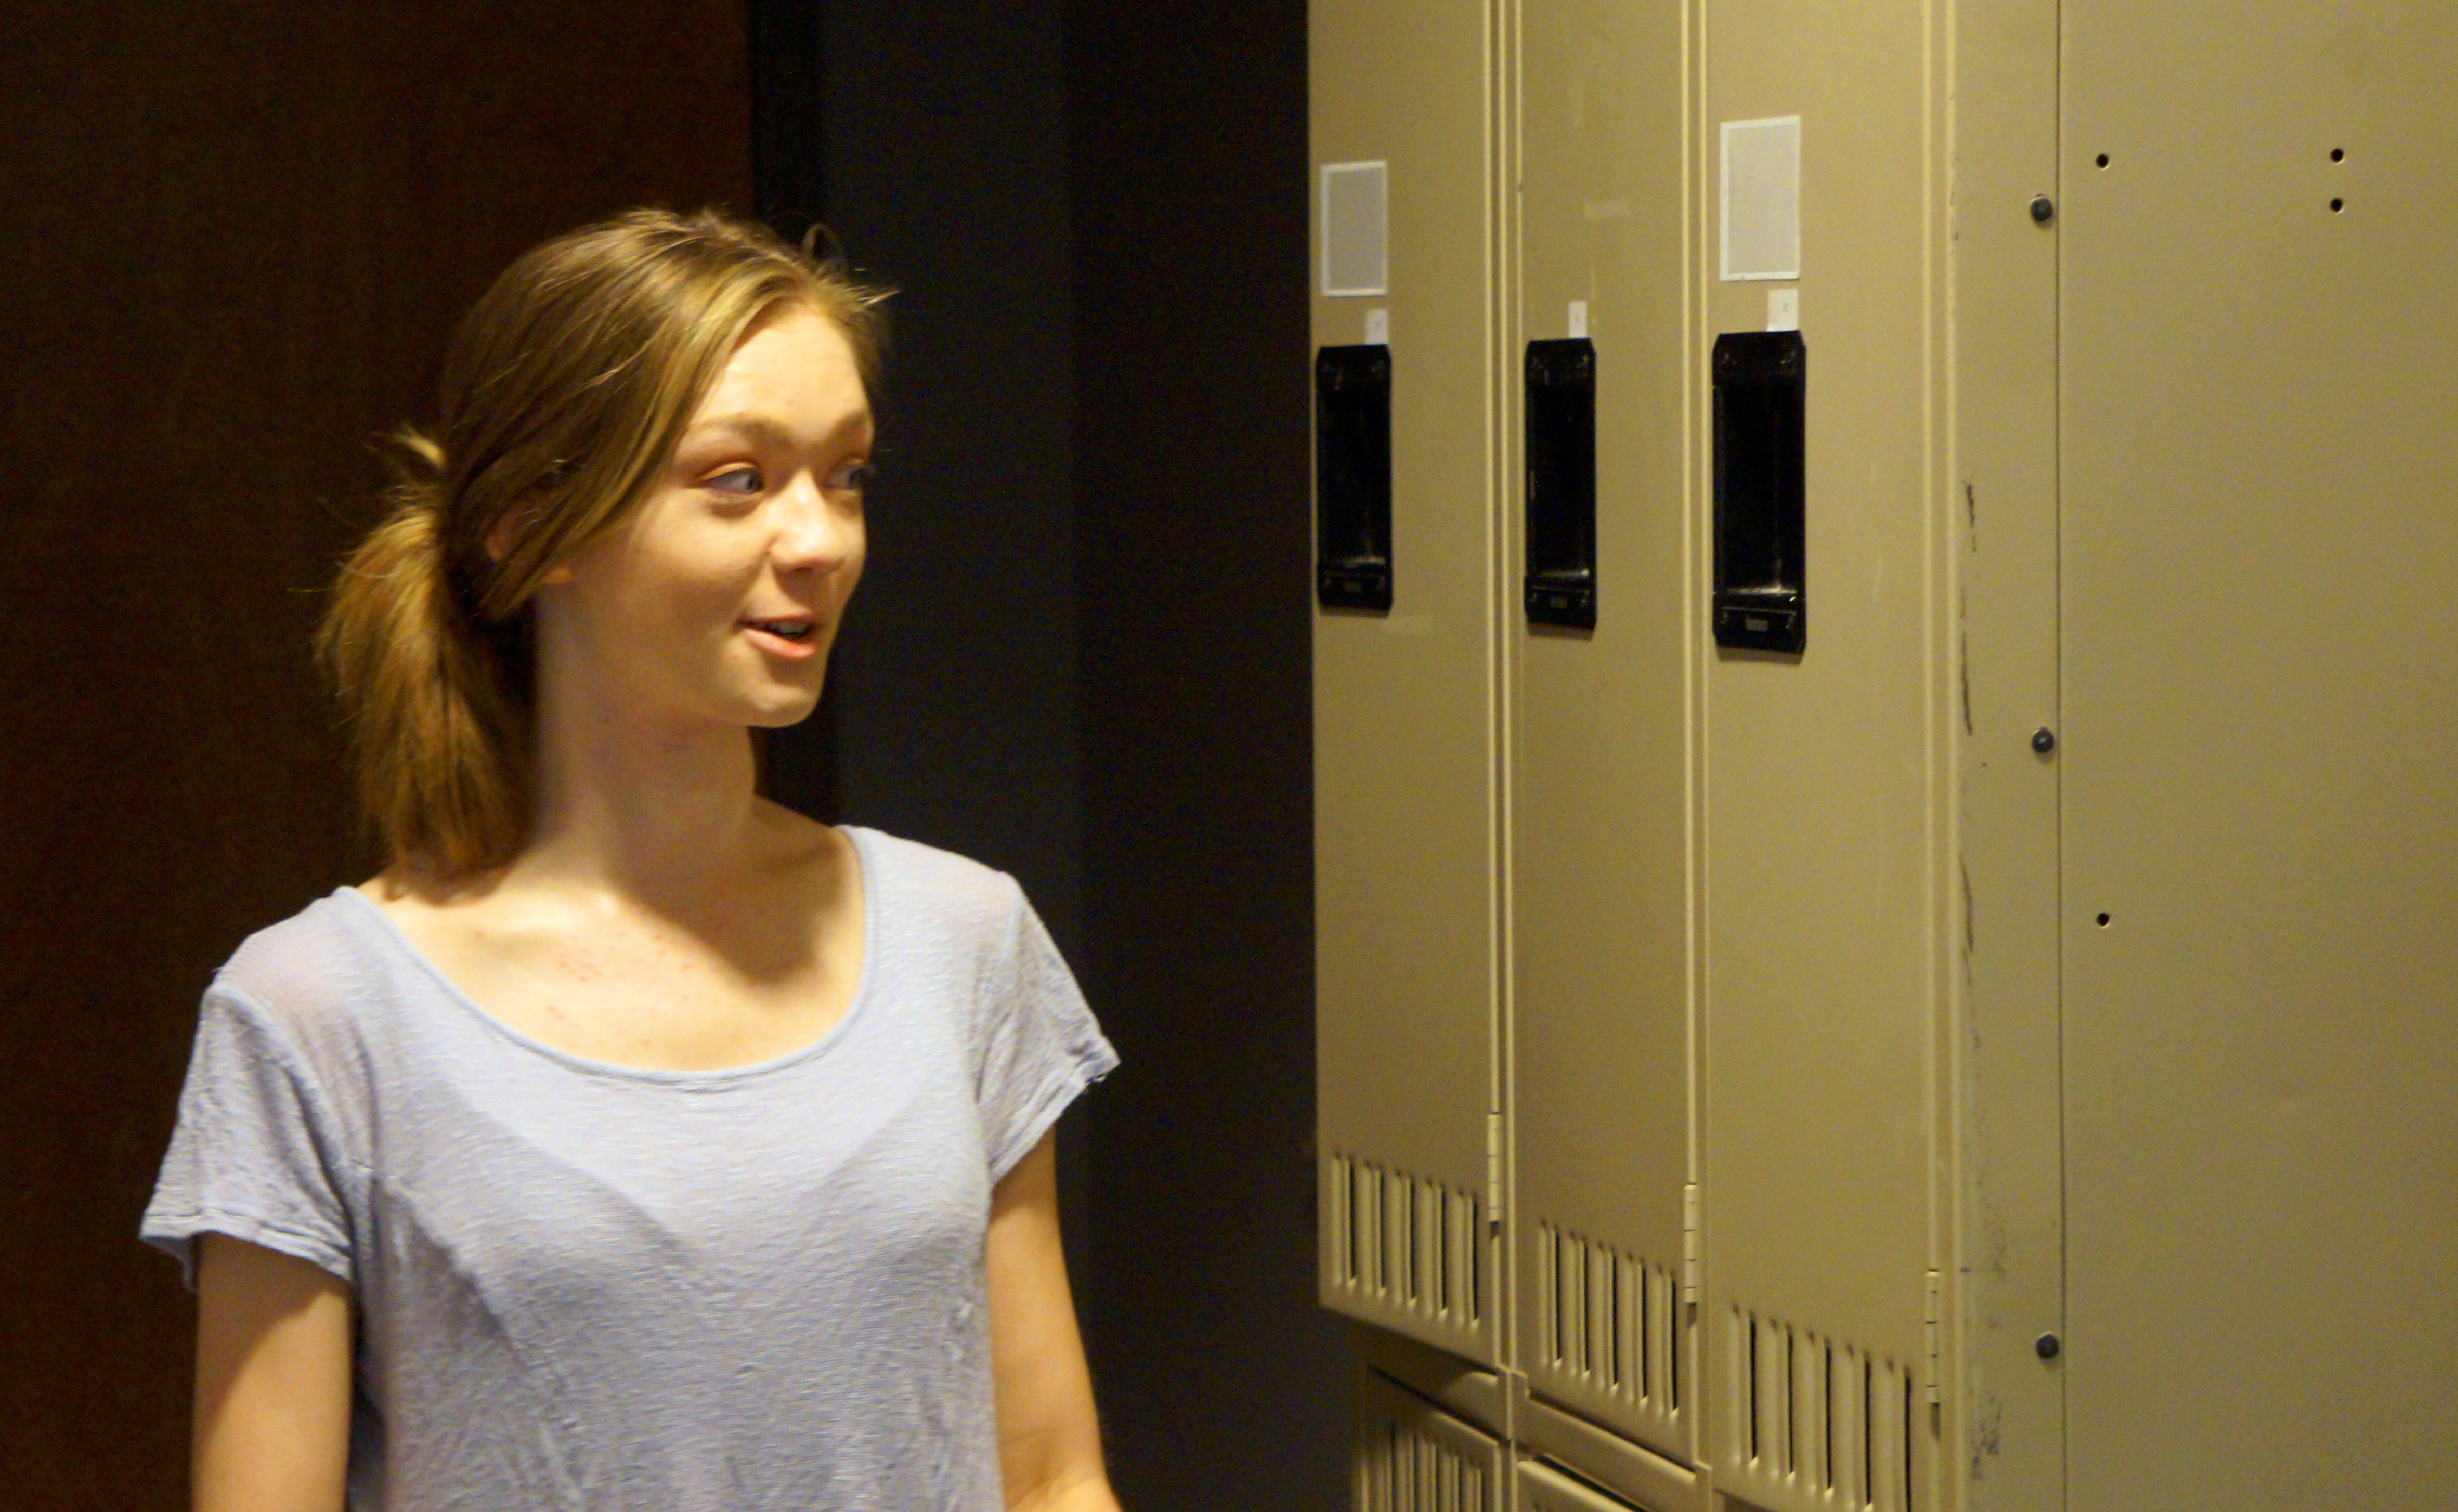 Alexandria Banta proudly gives a tour of the new lockers the Student Advisory Council petitioned for in the Honors Commons.